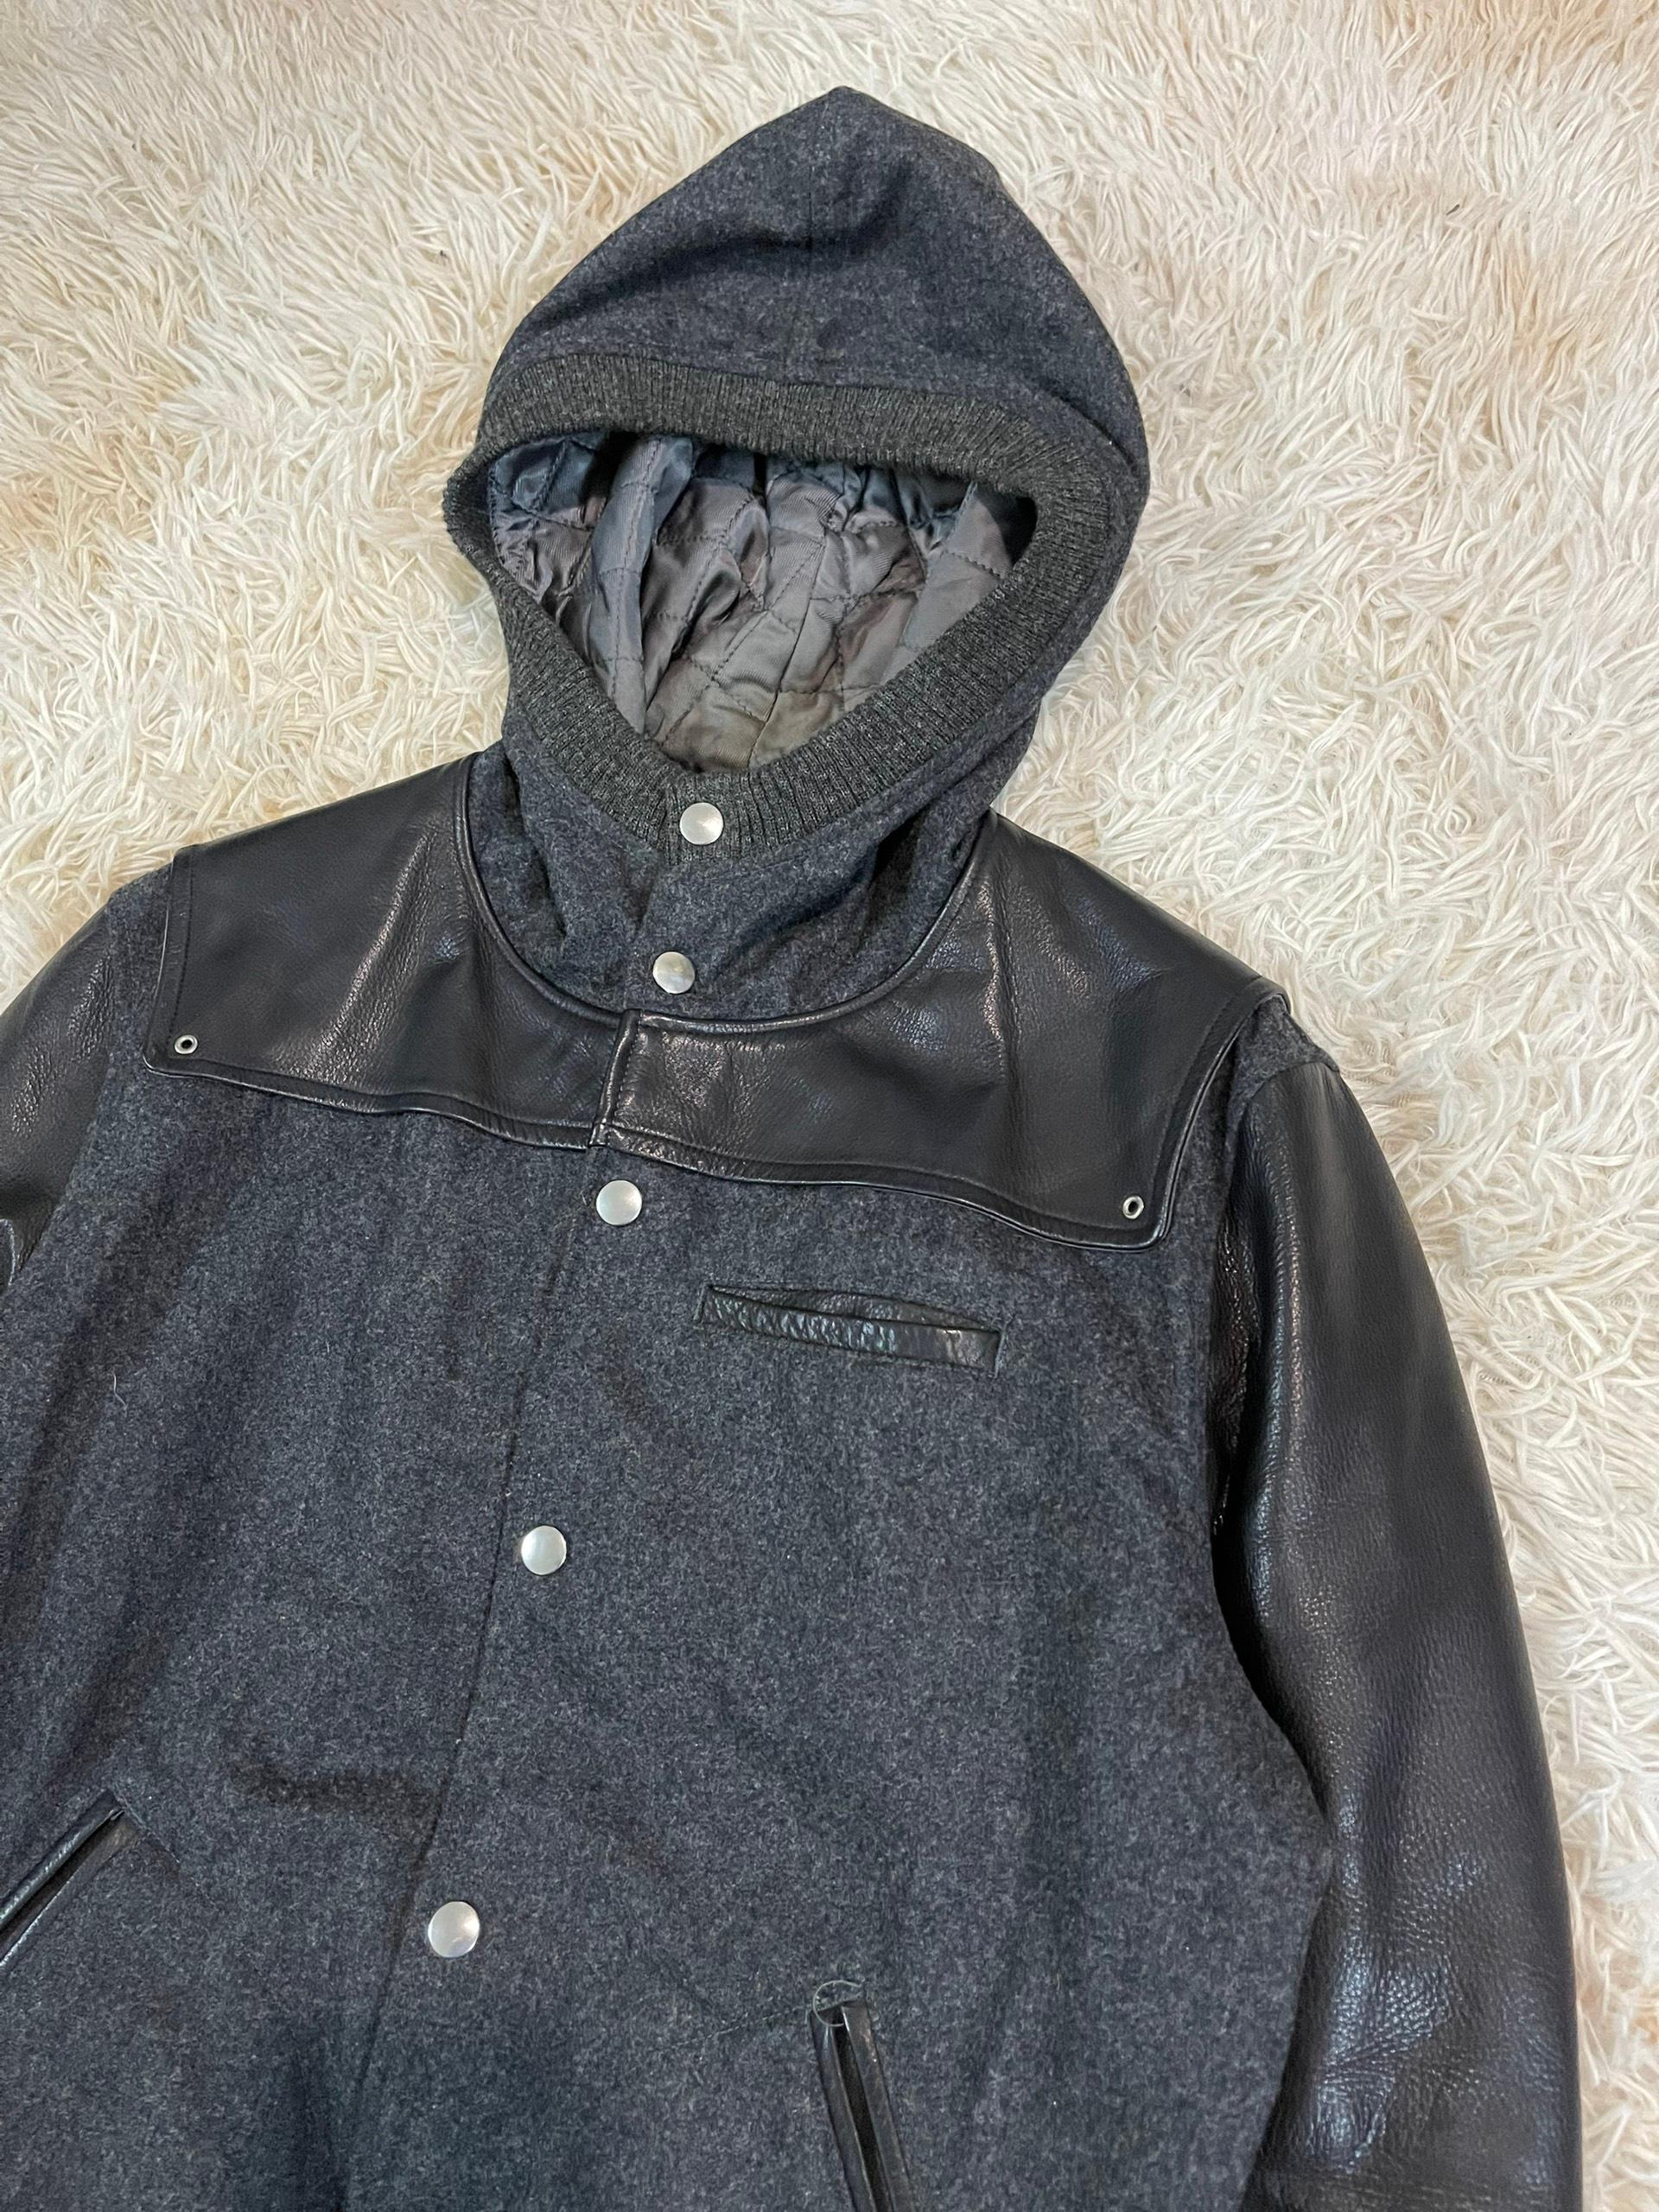 Amazing mixed composition of a padded body, wool hood with knit wool sleeve, along with a full cupro lining.

Other details include embroidered leather , two internal chest pockets, and a small outer chest pocket. Made in Japan. 

Size: 3, fits M to